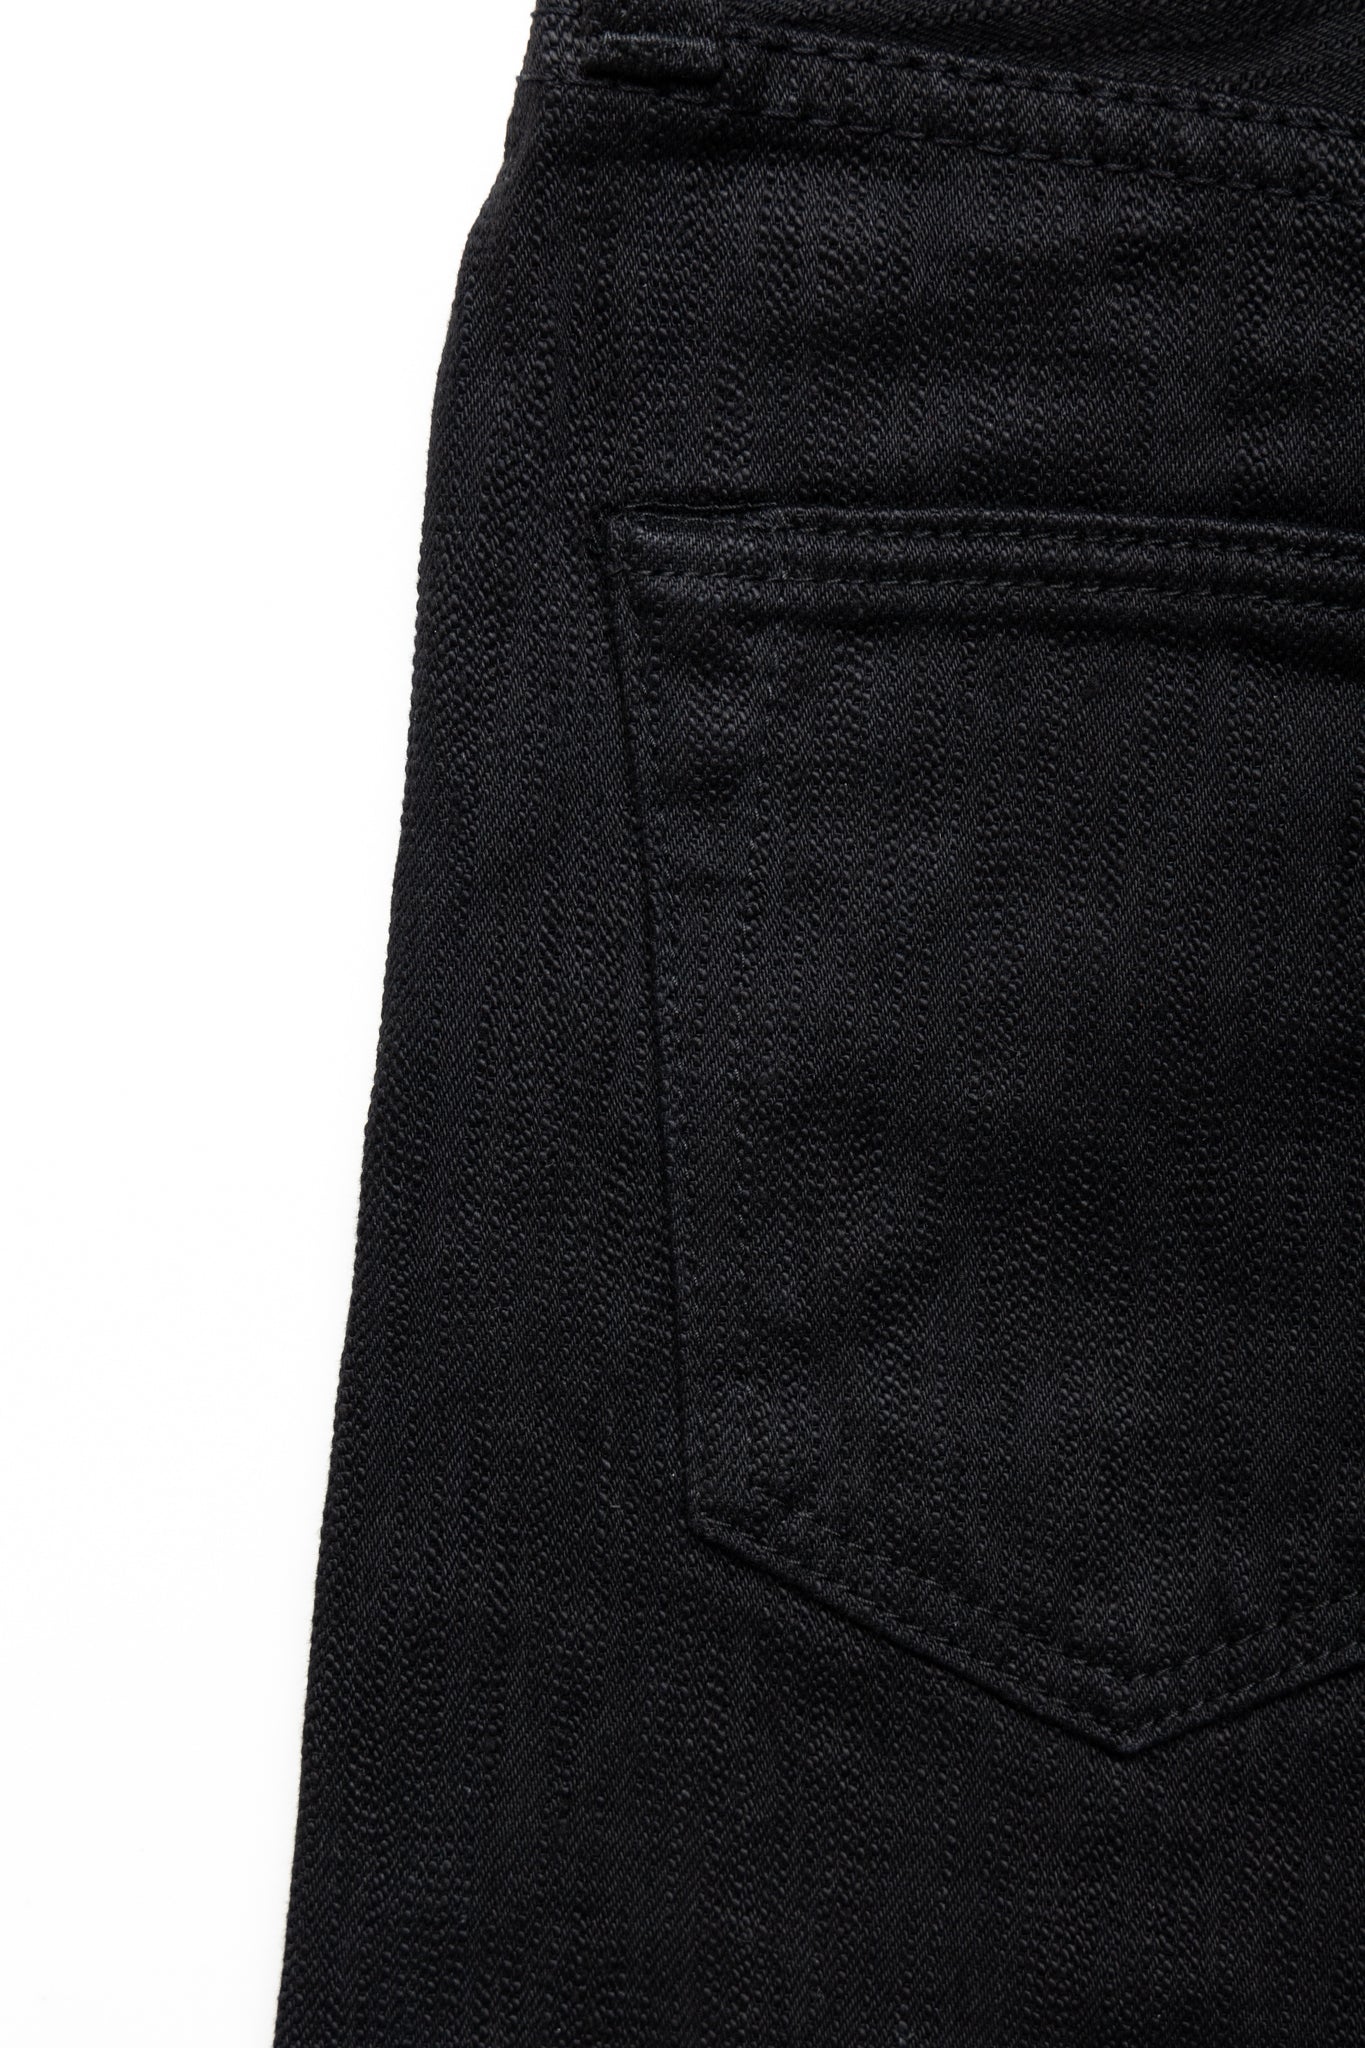 13oz Stretch Denim Relaxed Tapered - Double Black